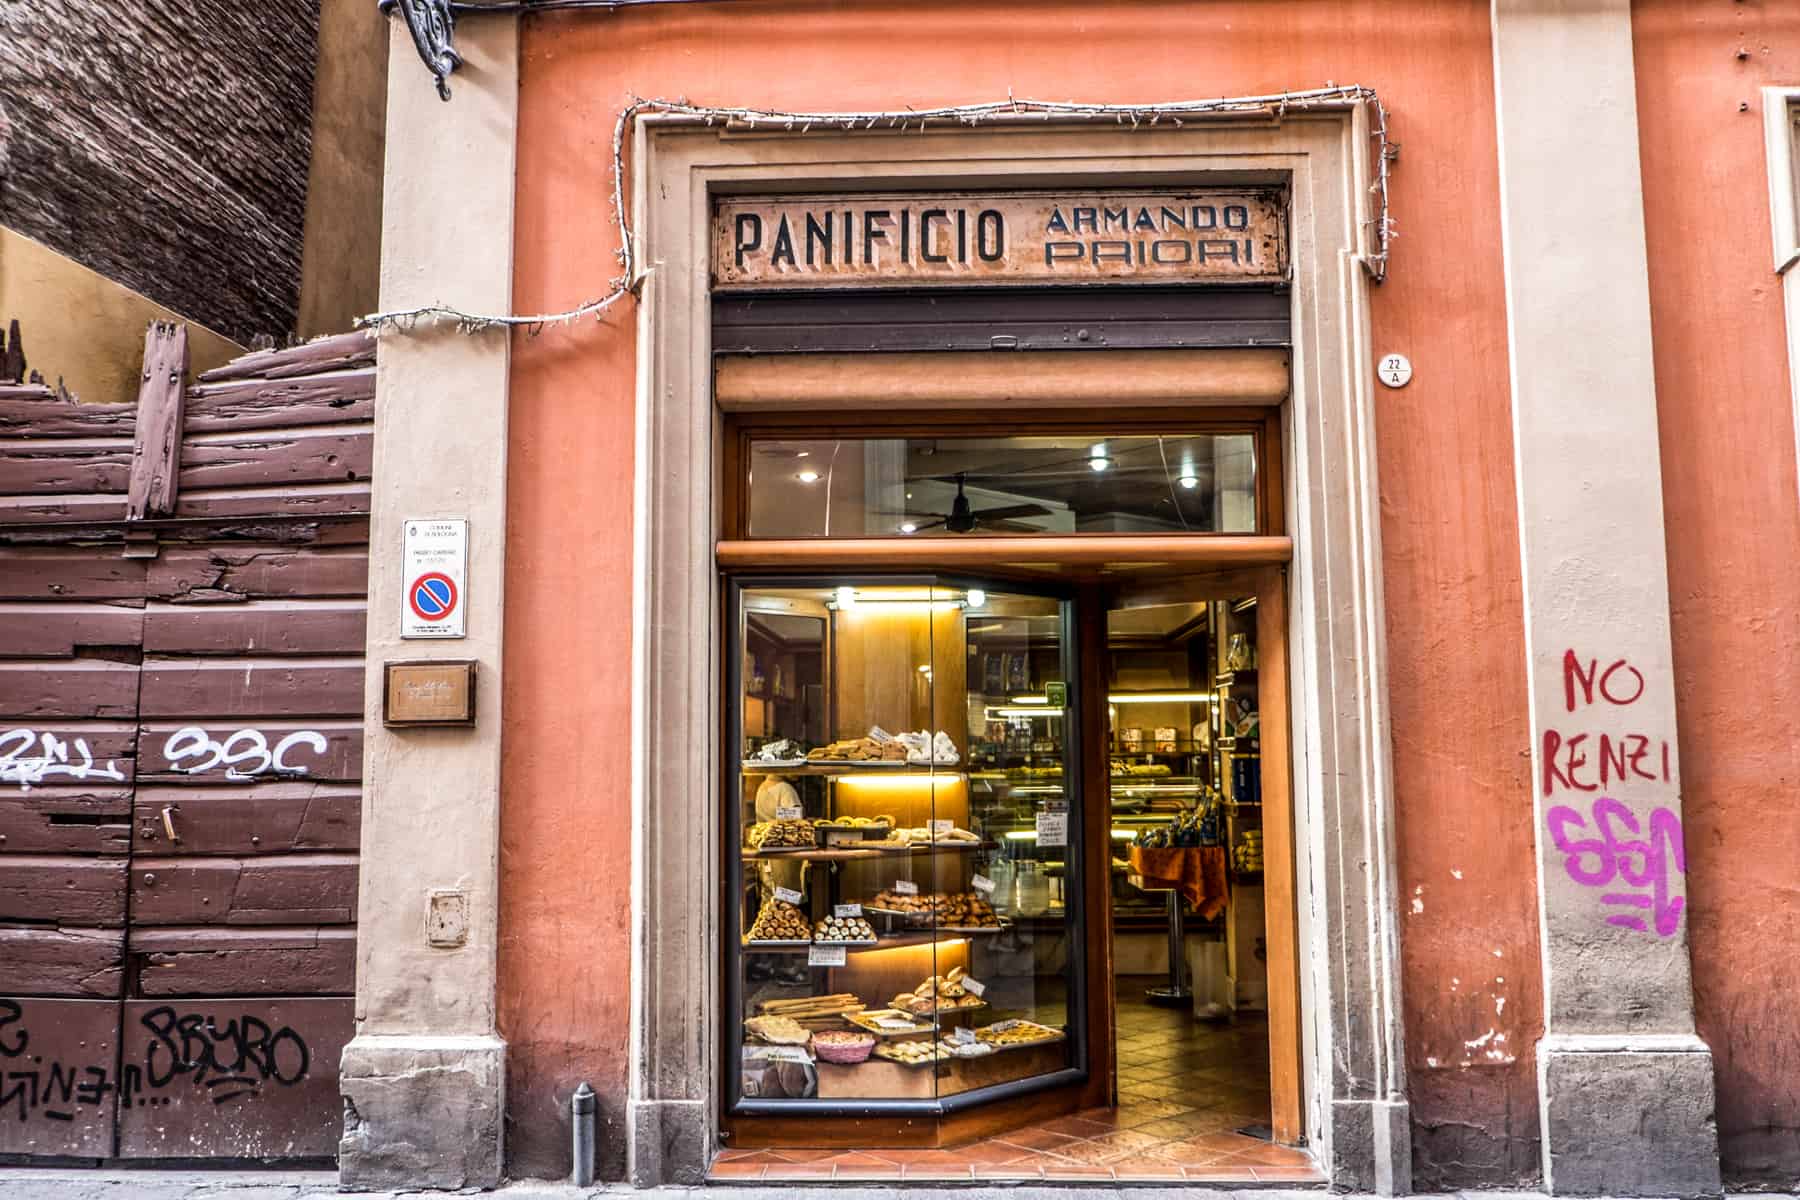 Entrance to a traditional bakery in Bologna on an orange wall, with a sign reading: "Panificio Armando Paiori".